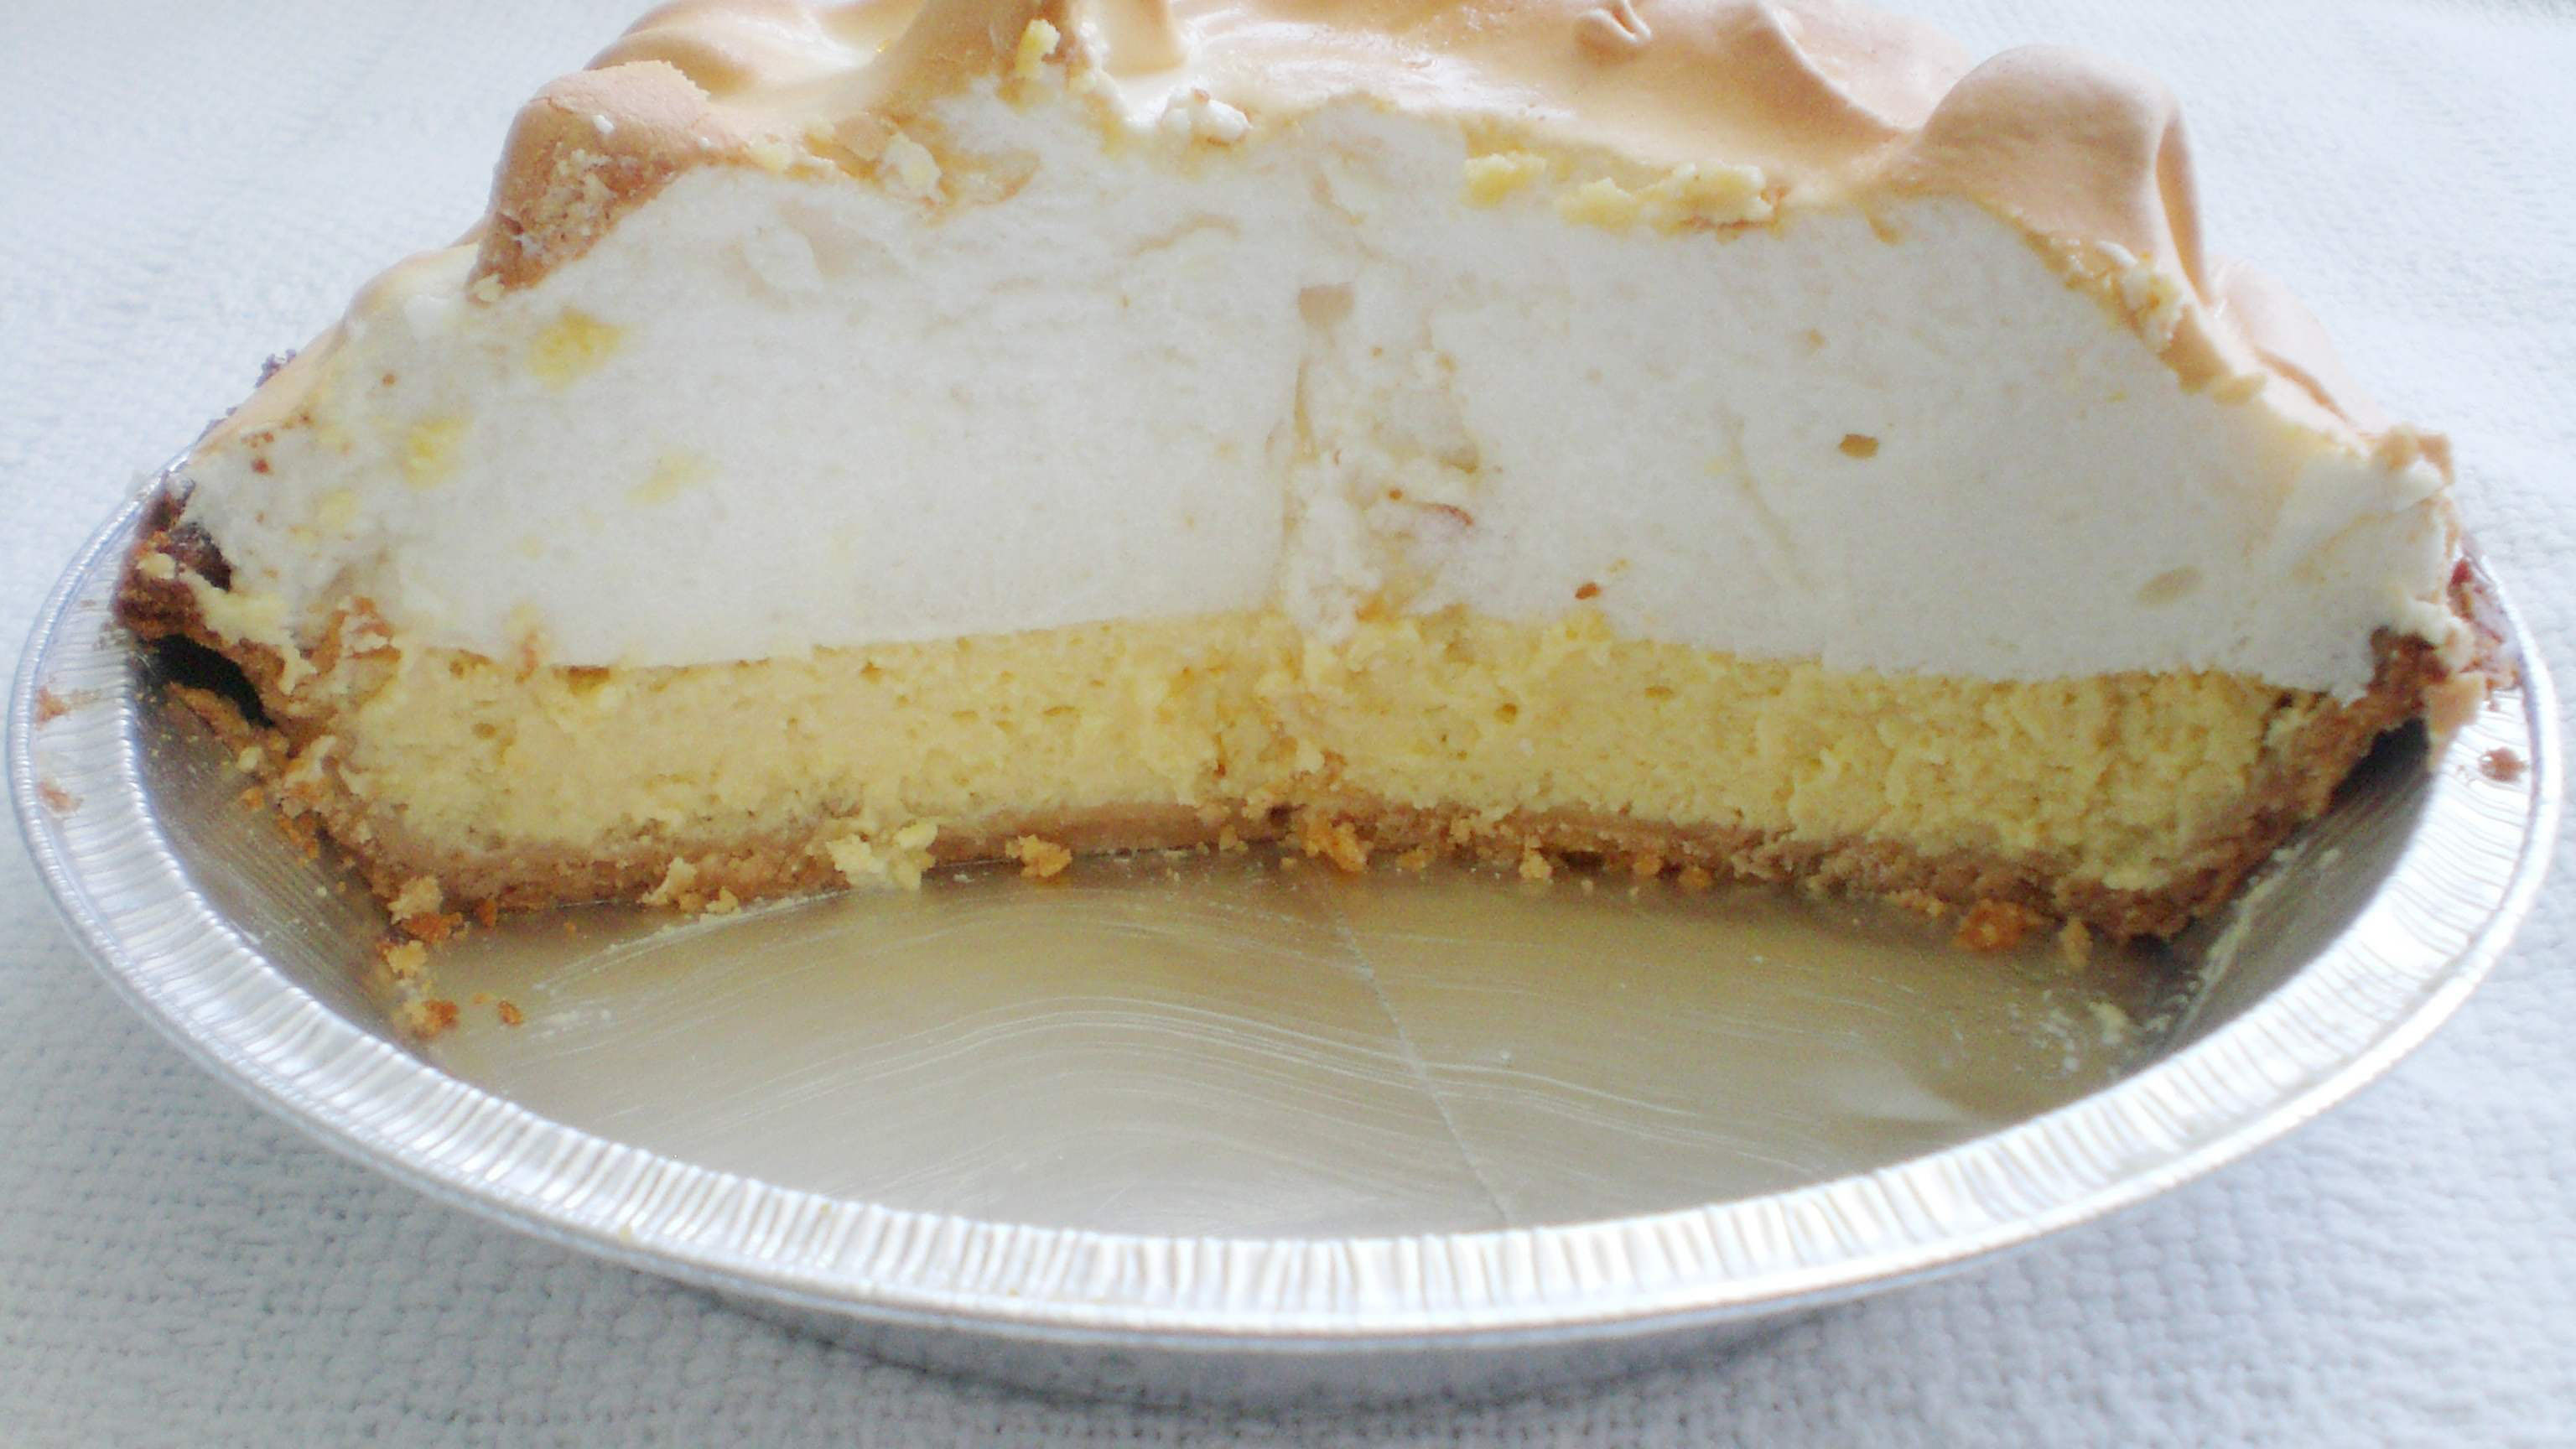 Key lime pie is an American dessert pie made of Key lime juice, egg yolks, and sweetened condensed milk. It may be served with no topping, topped with...